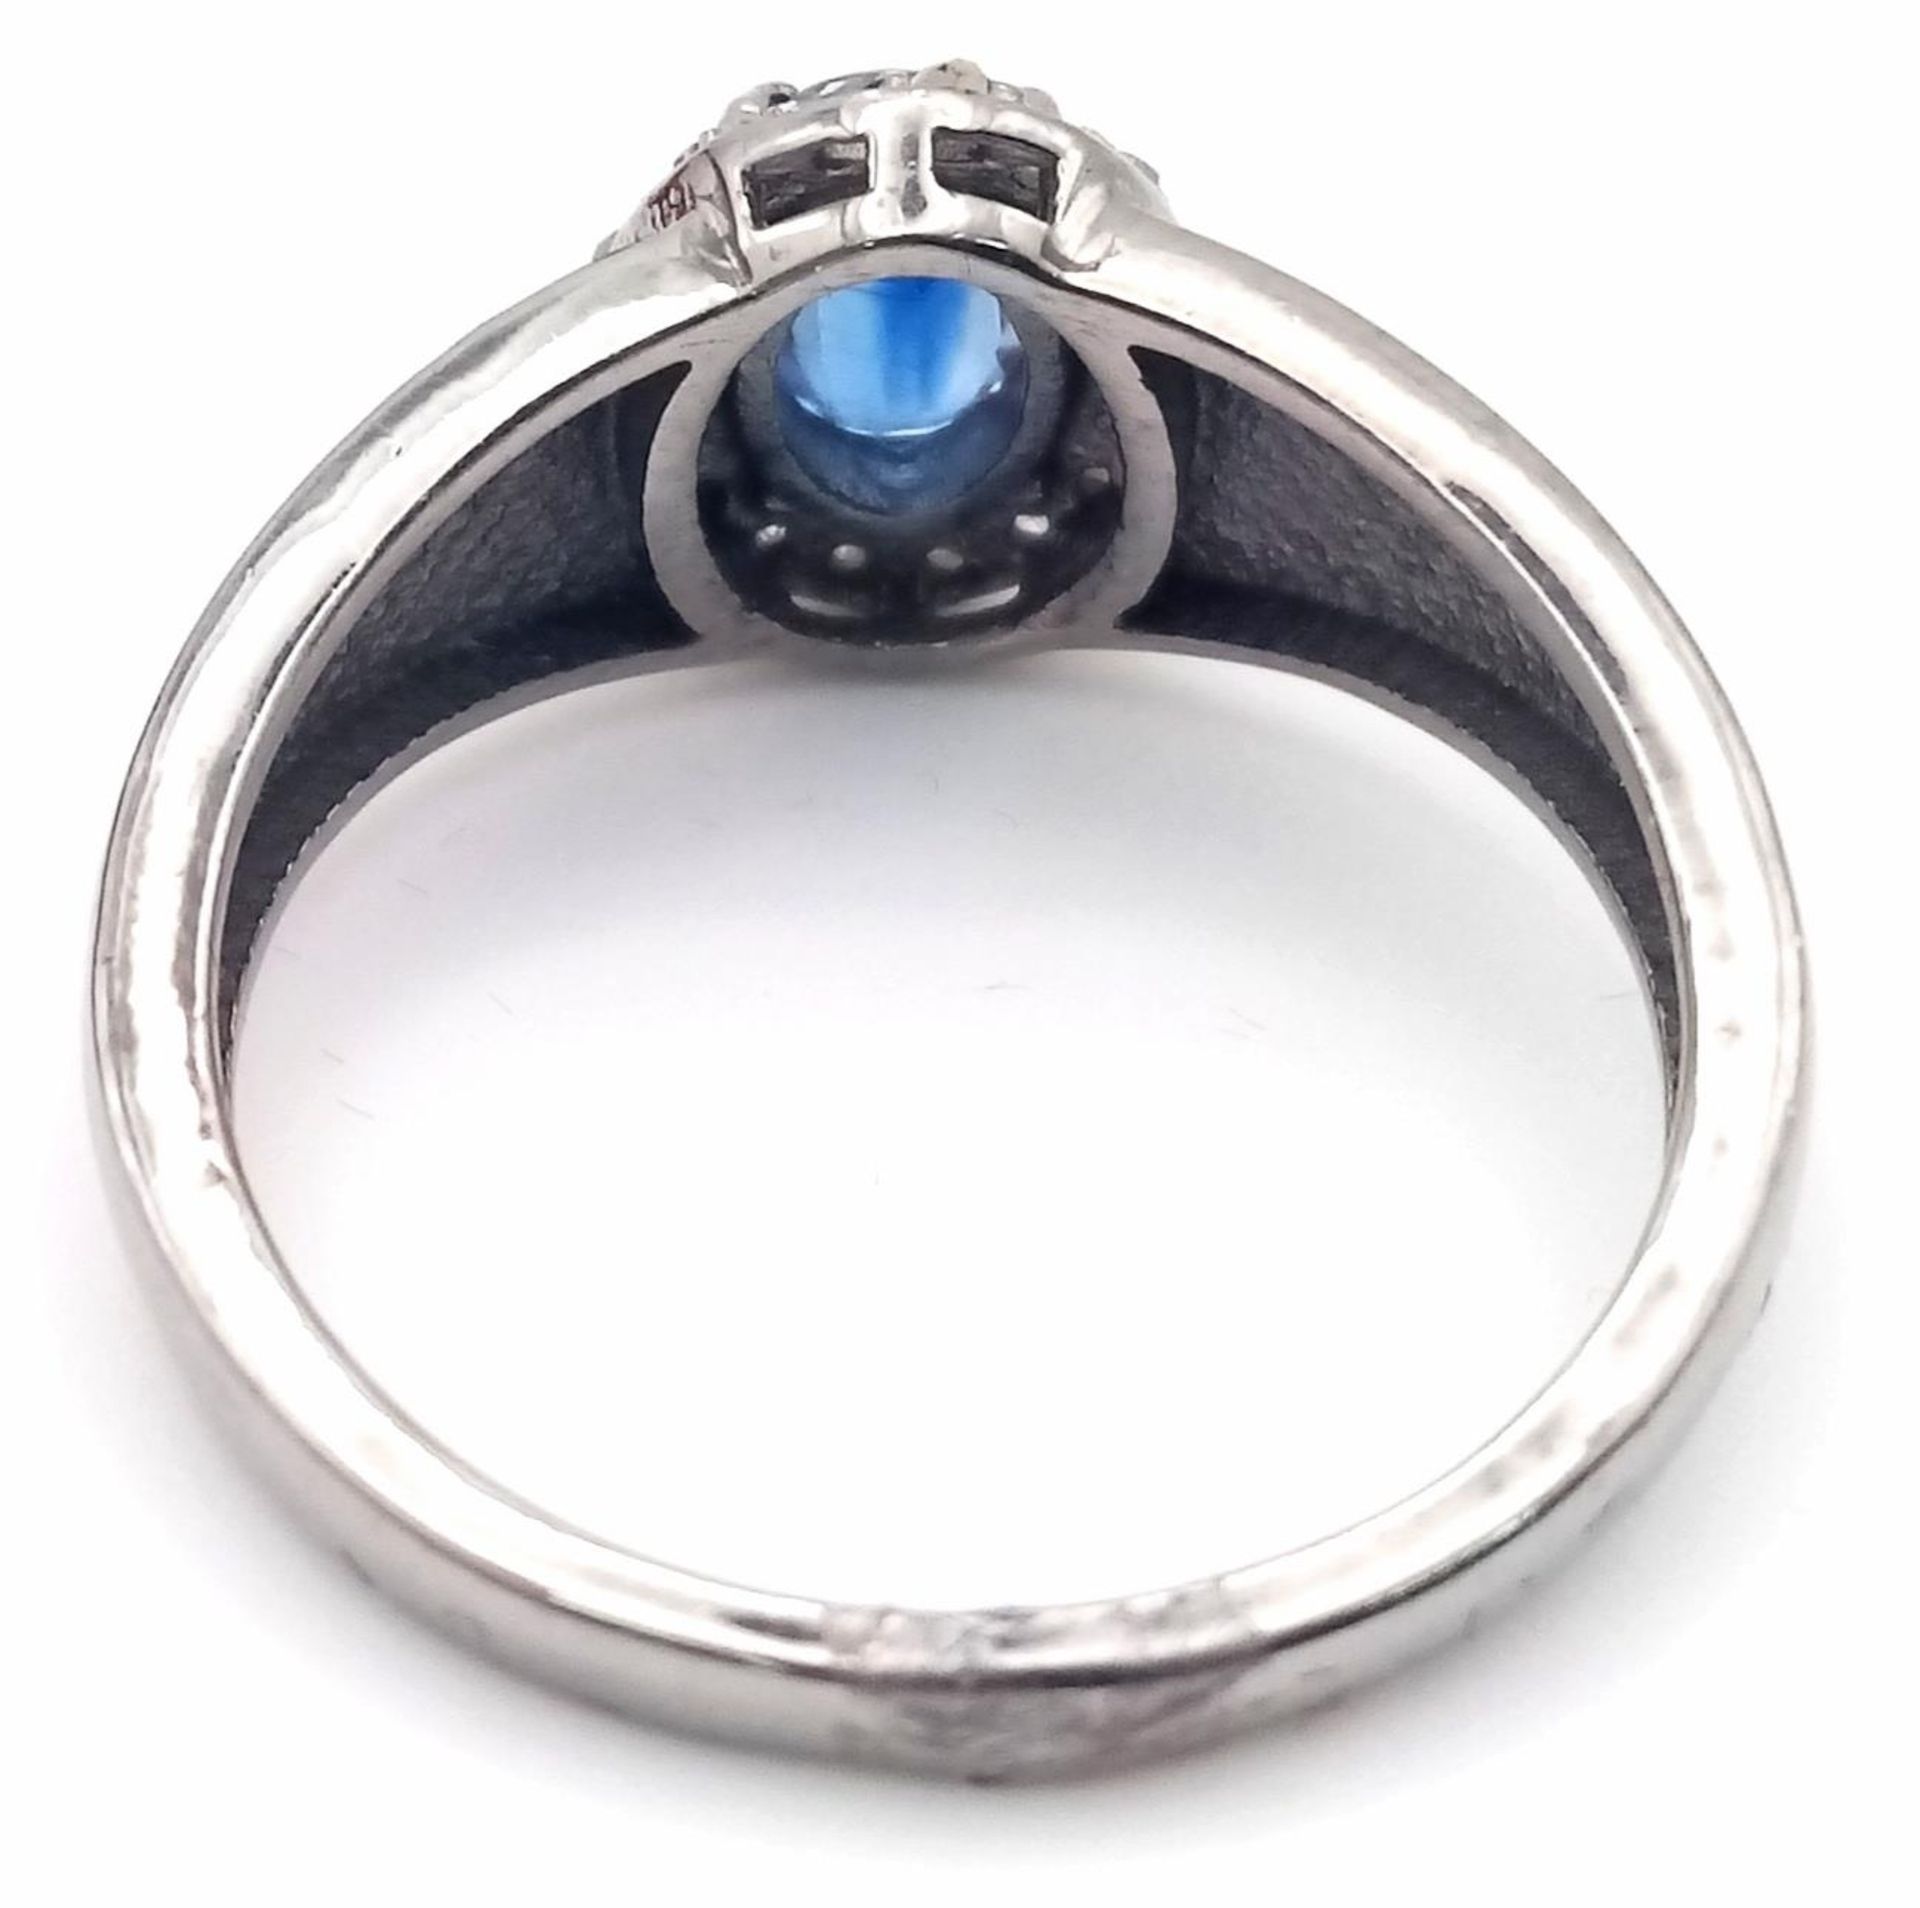 A Kyanite and Diamond Ring set in 925 Silver with a Black Rhodium Coating. Size O. Kyanite- 0. - Image 3 of 5